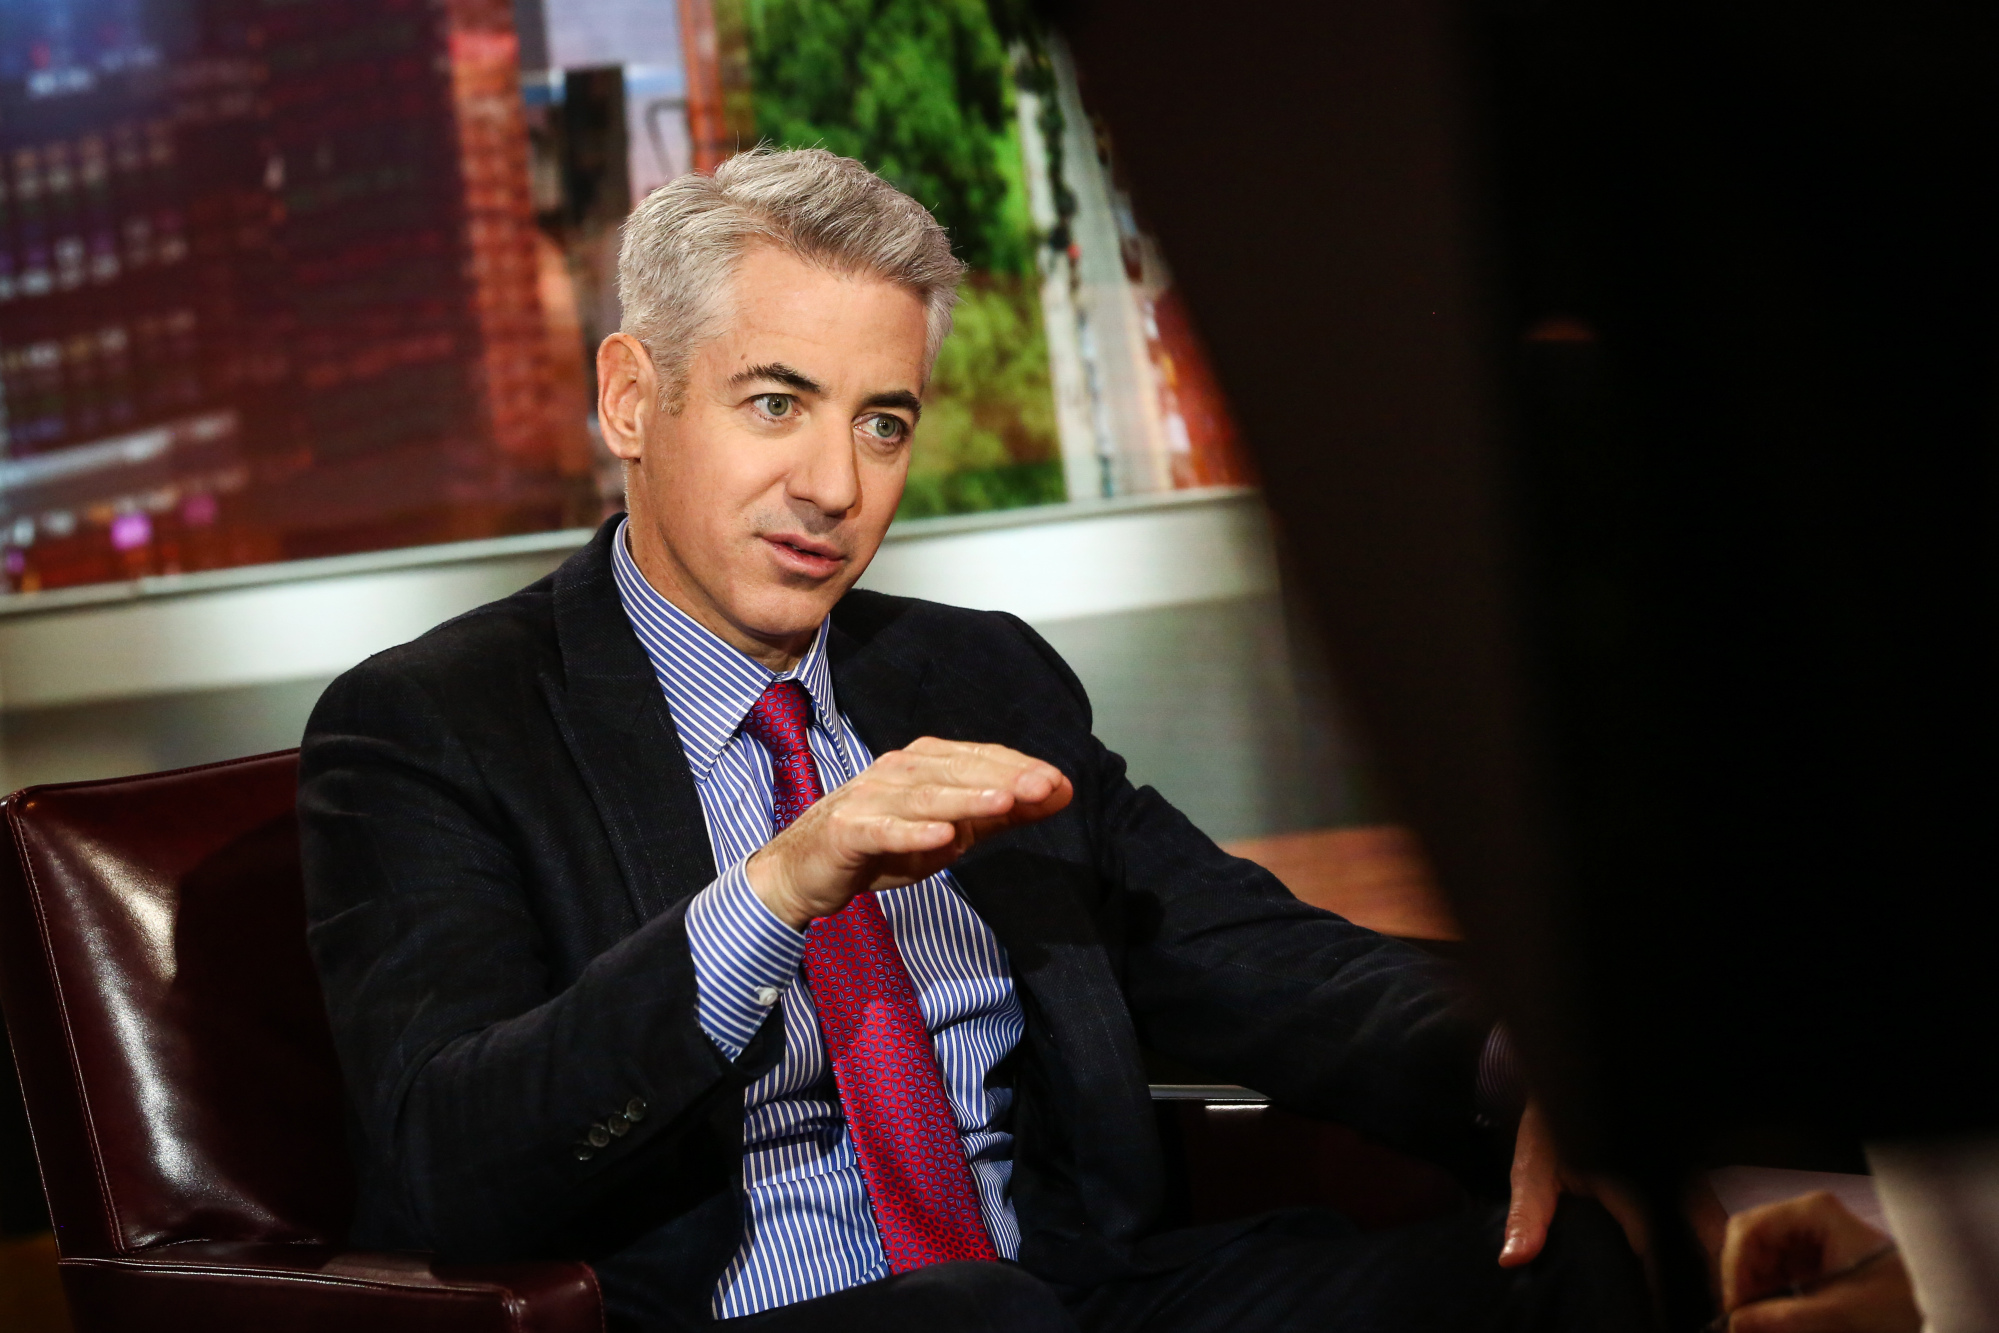 Billionaire Bill Ackman Says Visa Should Pay 'Very Large' Amount in Pornhub  Case - Bloomberg